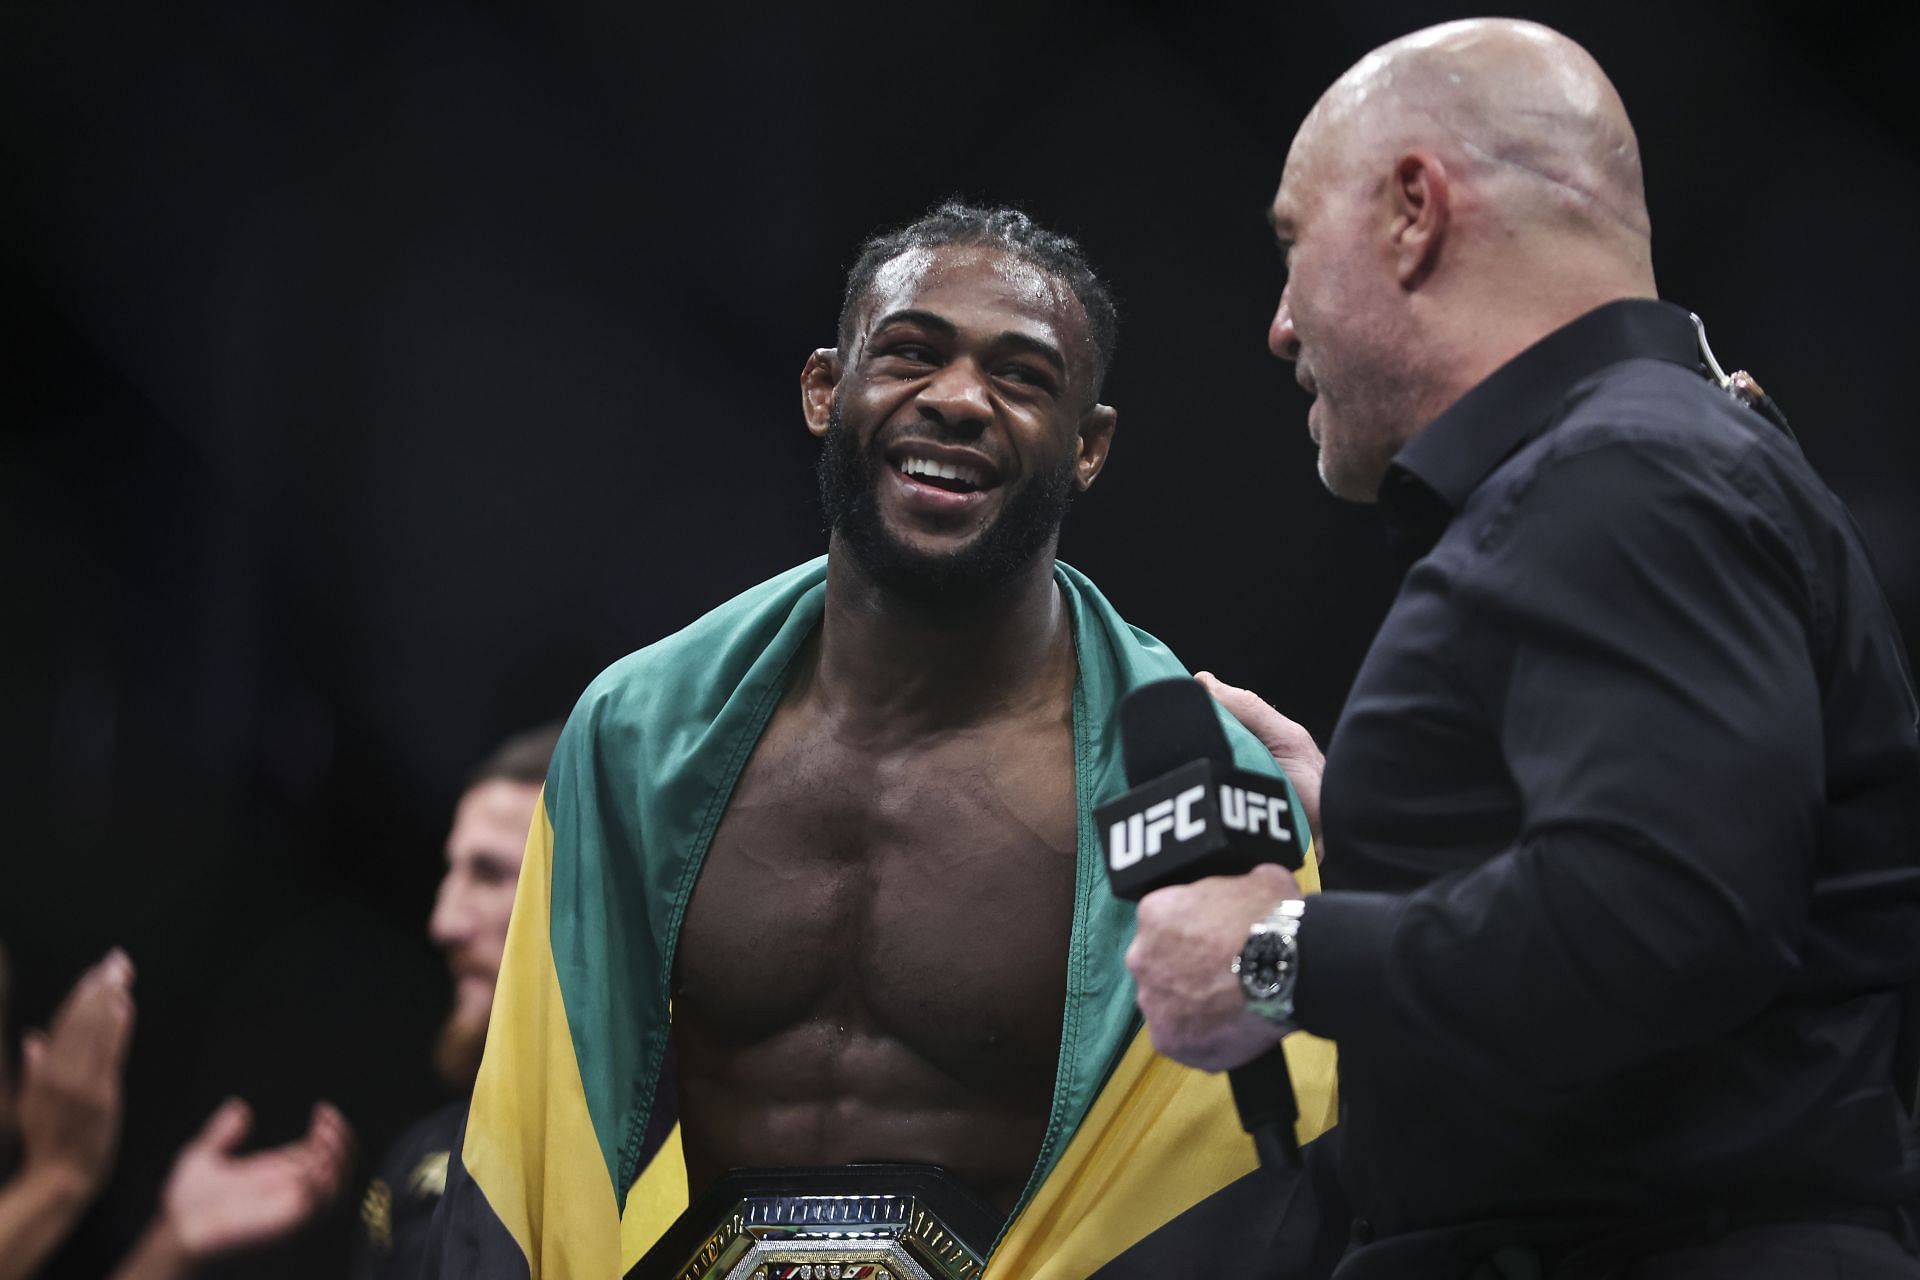 A fight between Aljamain Sterling and Henry Cejudo could draw money on pay-per-view